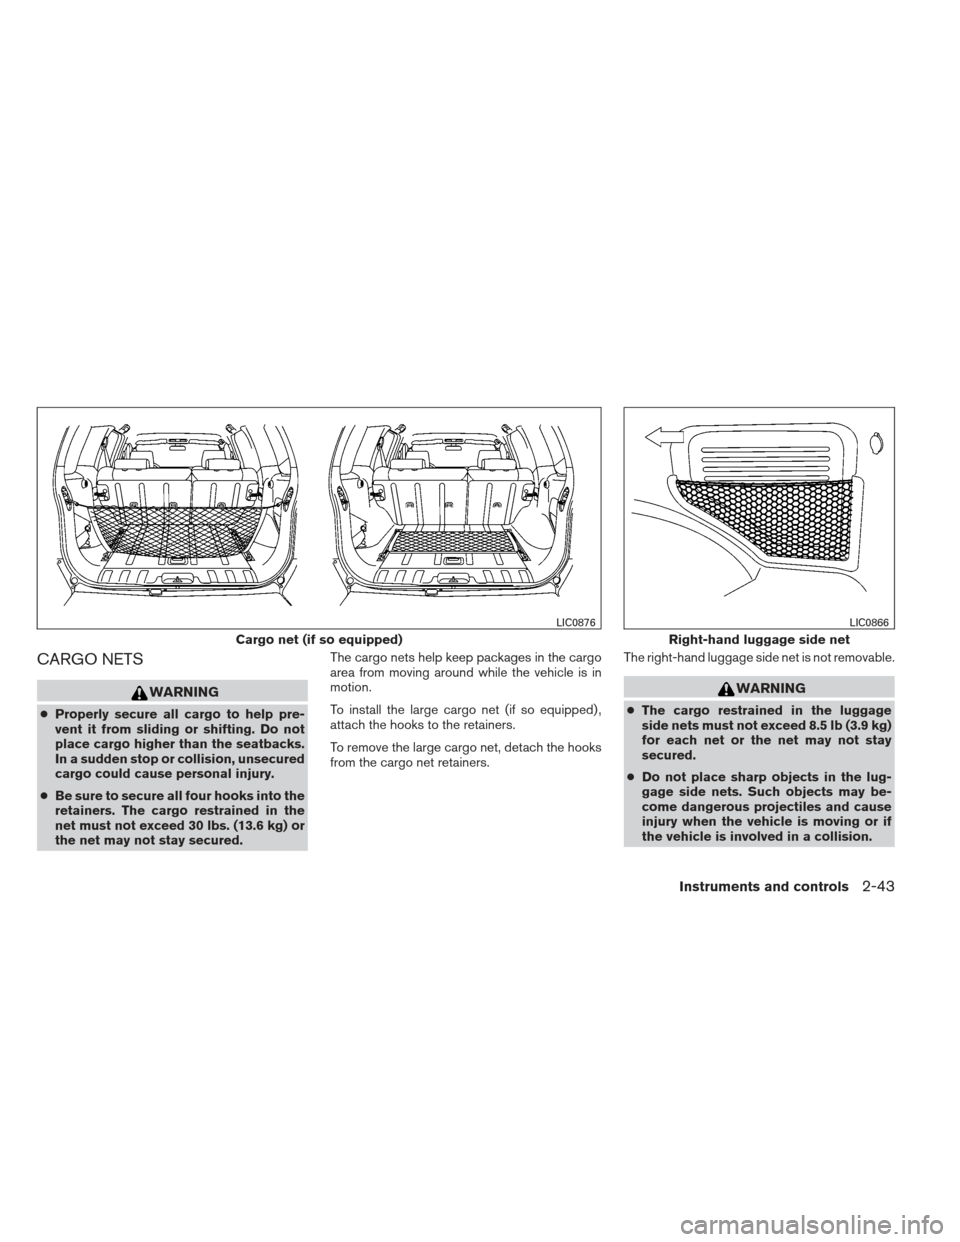 NISSAN XTERRA 2013 N50 / 2.G Owners Manual CARGO NETS
WARNING
●Properly secure all cargo to help pre-
vent it from sliding or shifting. Do not
place cargo higher than the seatbacks.
In a sudden stop or collision, unsecured
cargo could cause 